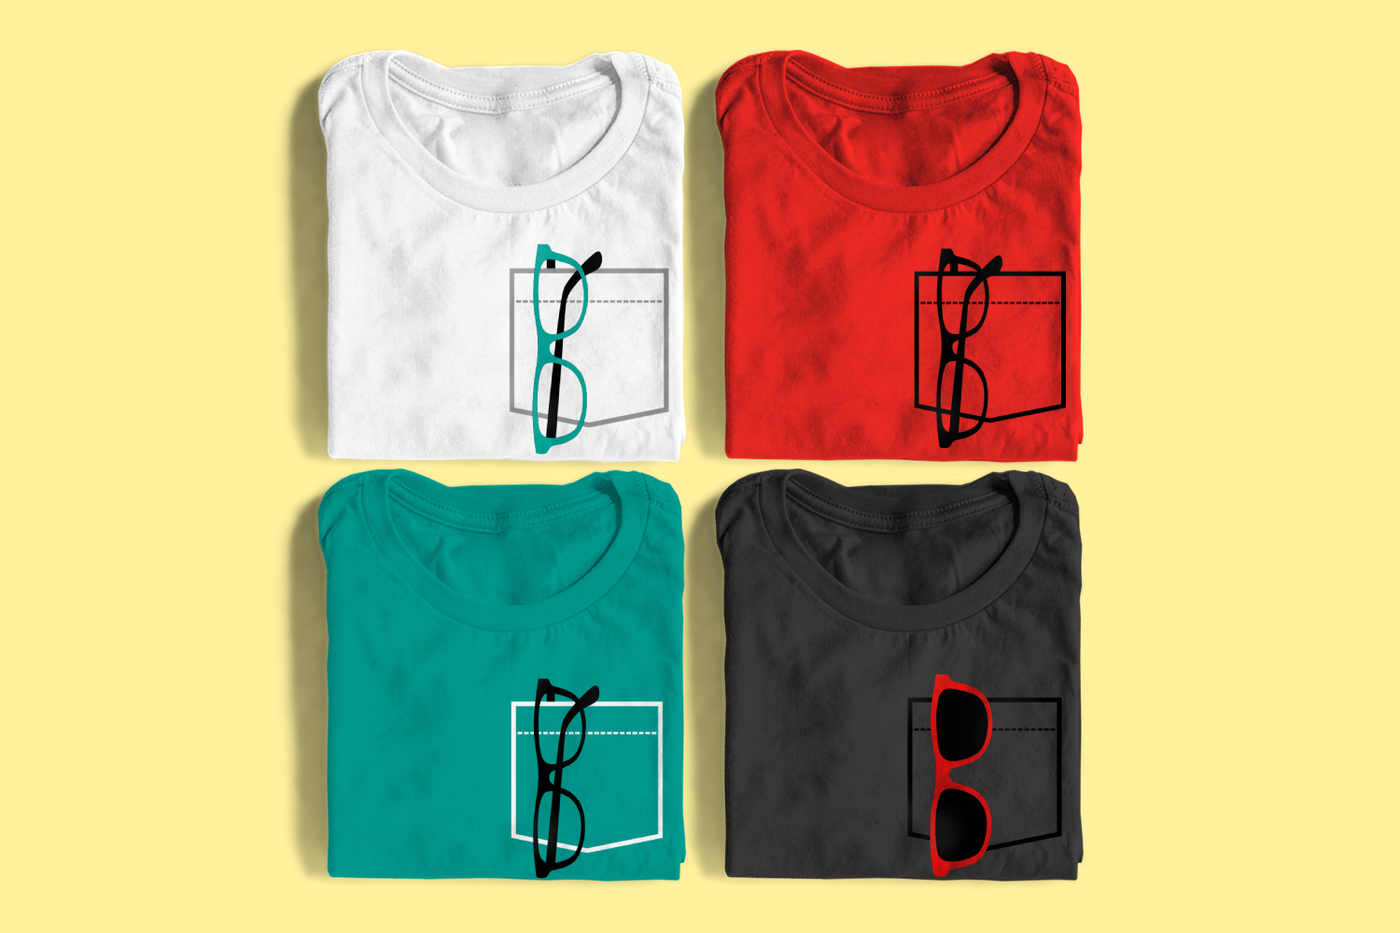 Four folded tees. Each has a faux pocket design with glasses hanging from it.